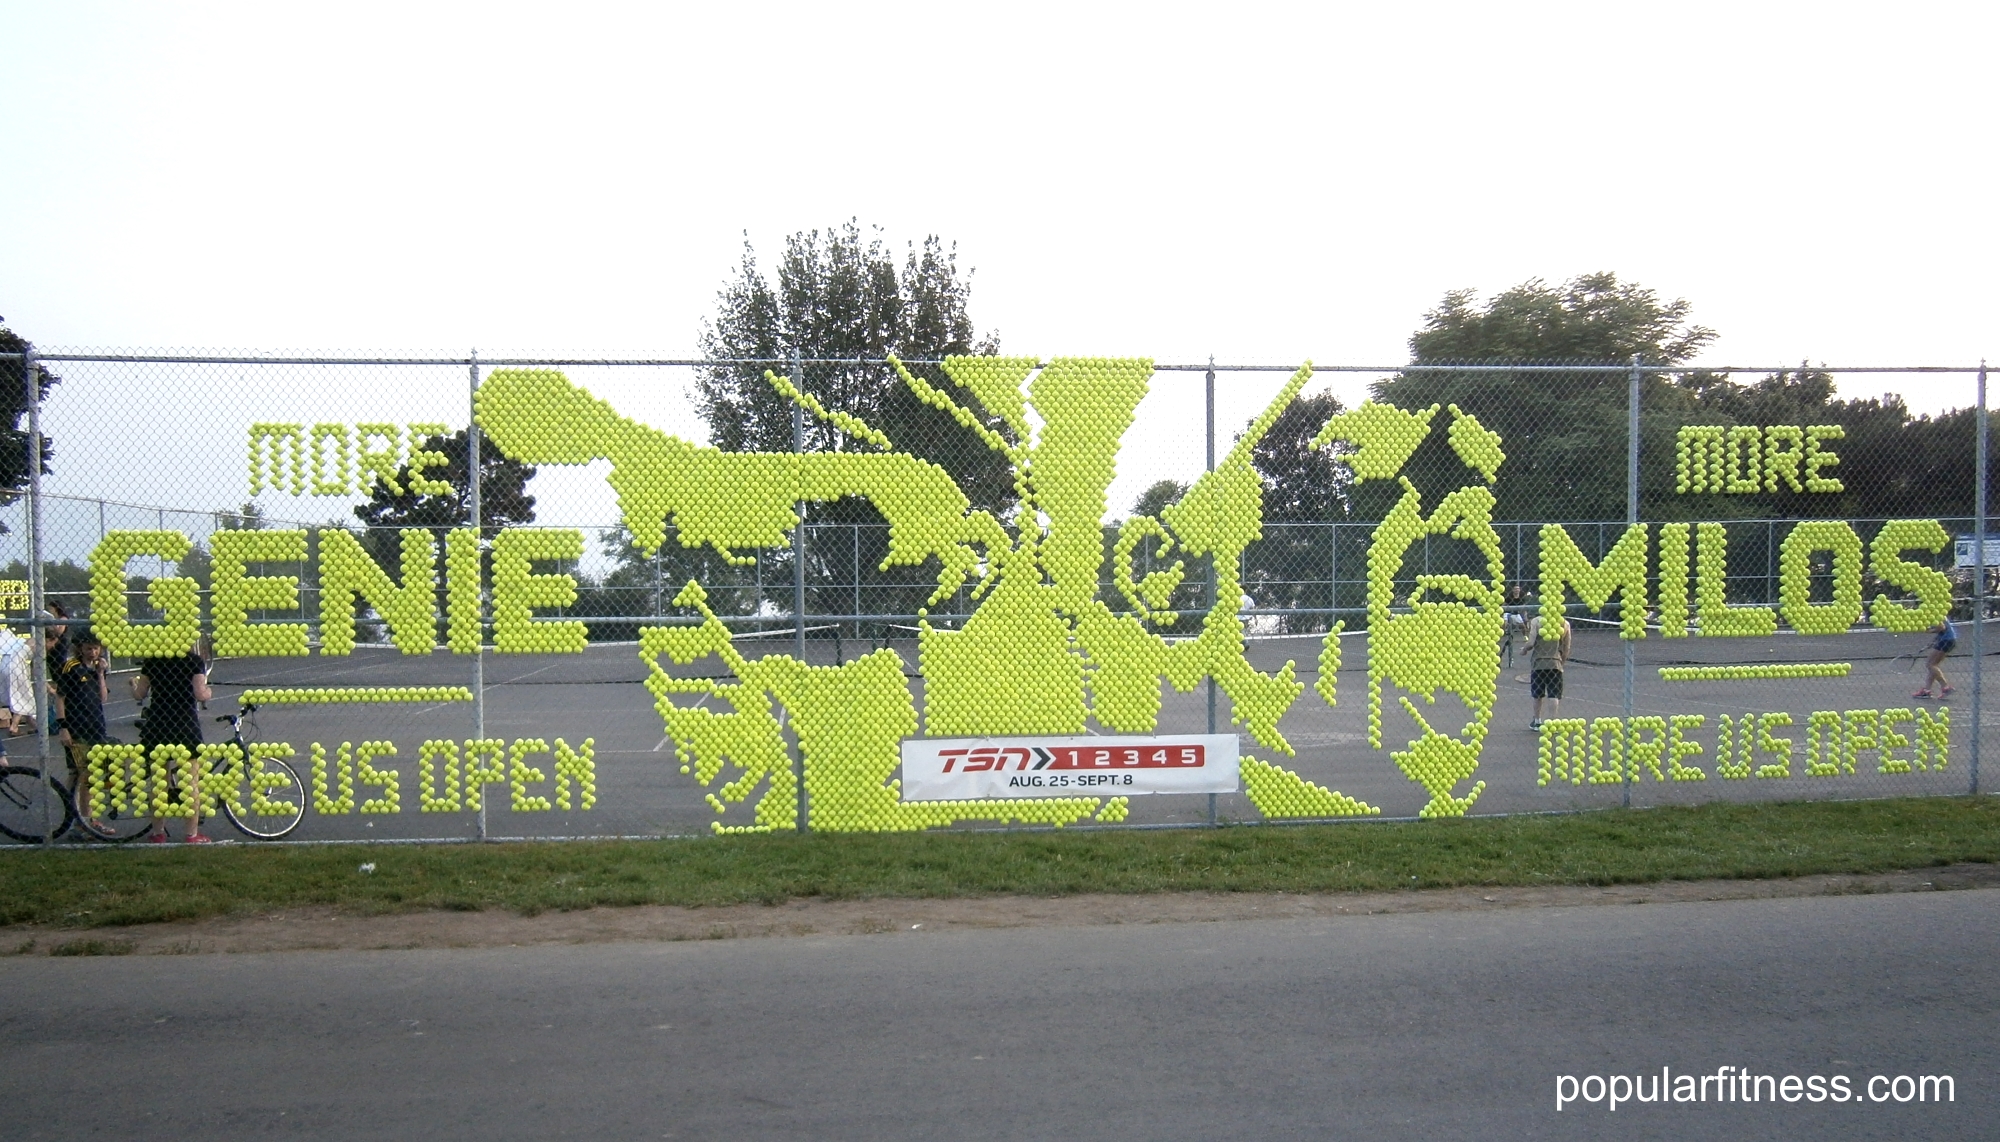 Fence art using tennis balls spelling out More Eugenie Bouchard and Milos Raonic